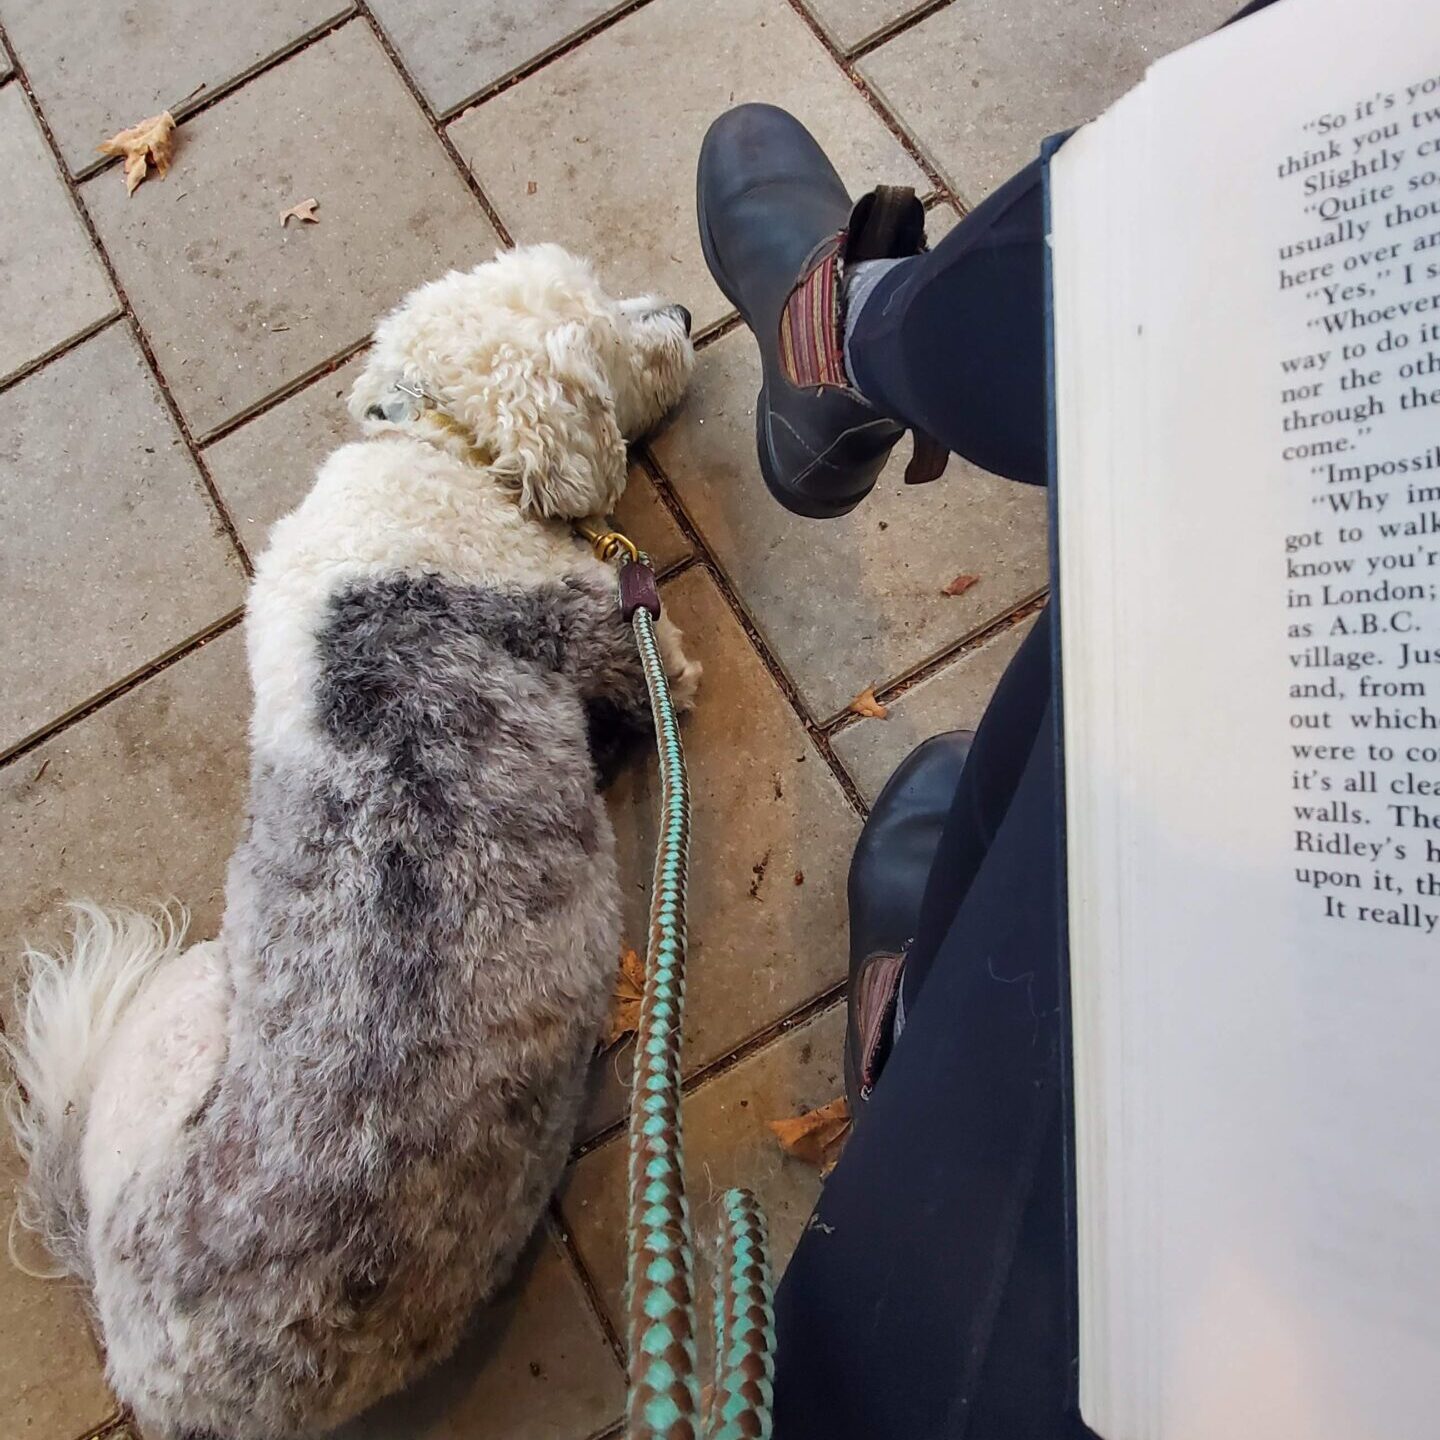 dog lying calmly at feet while owner reads